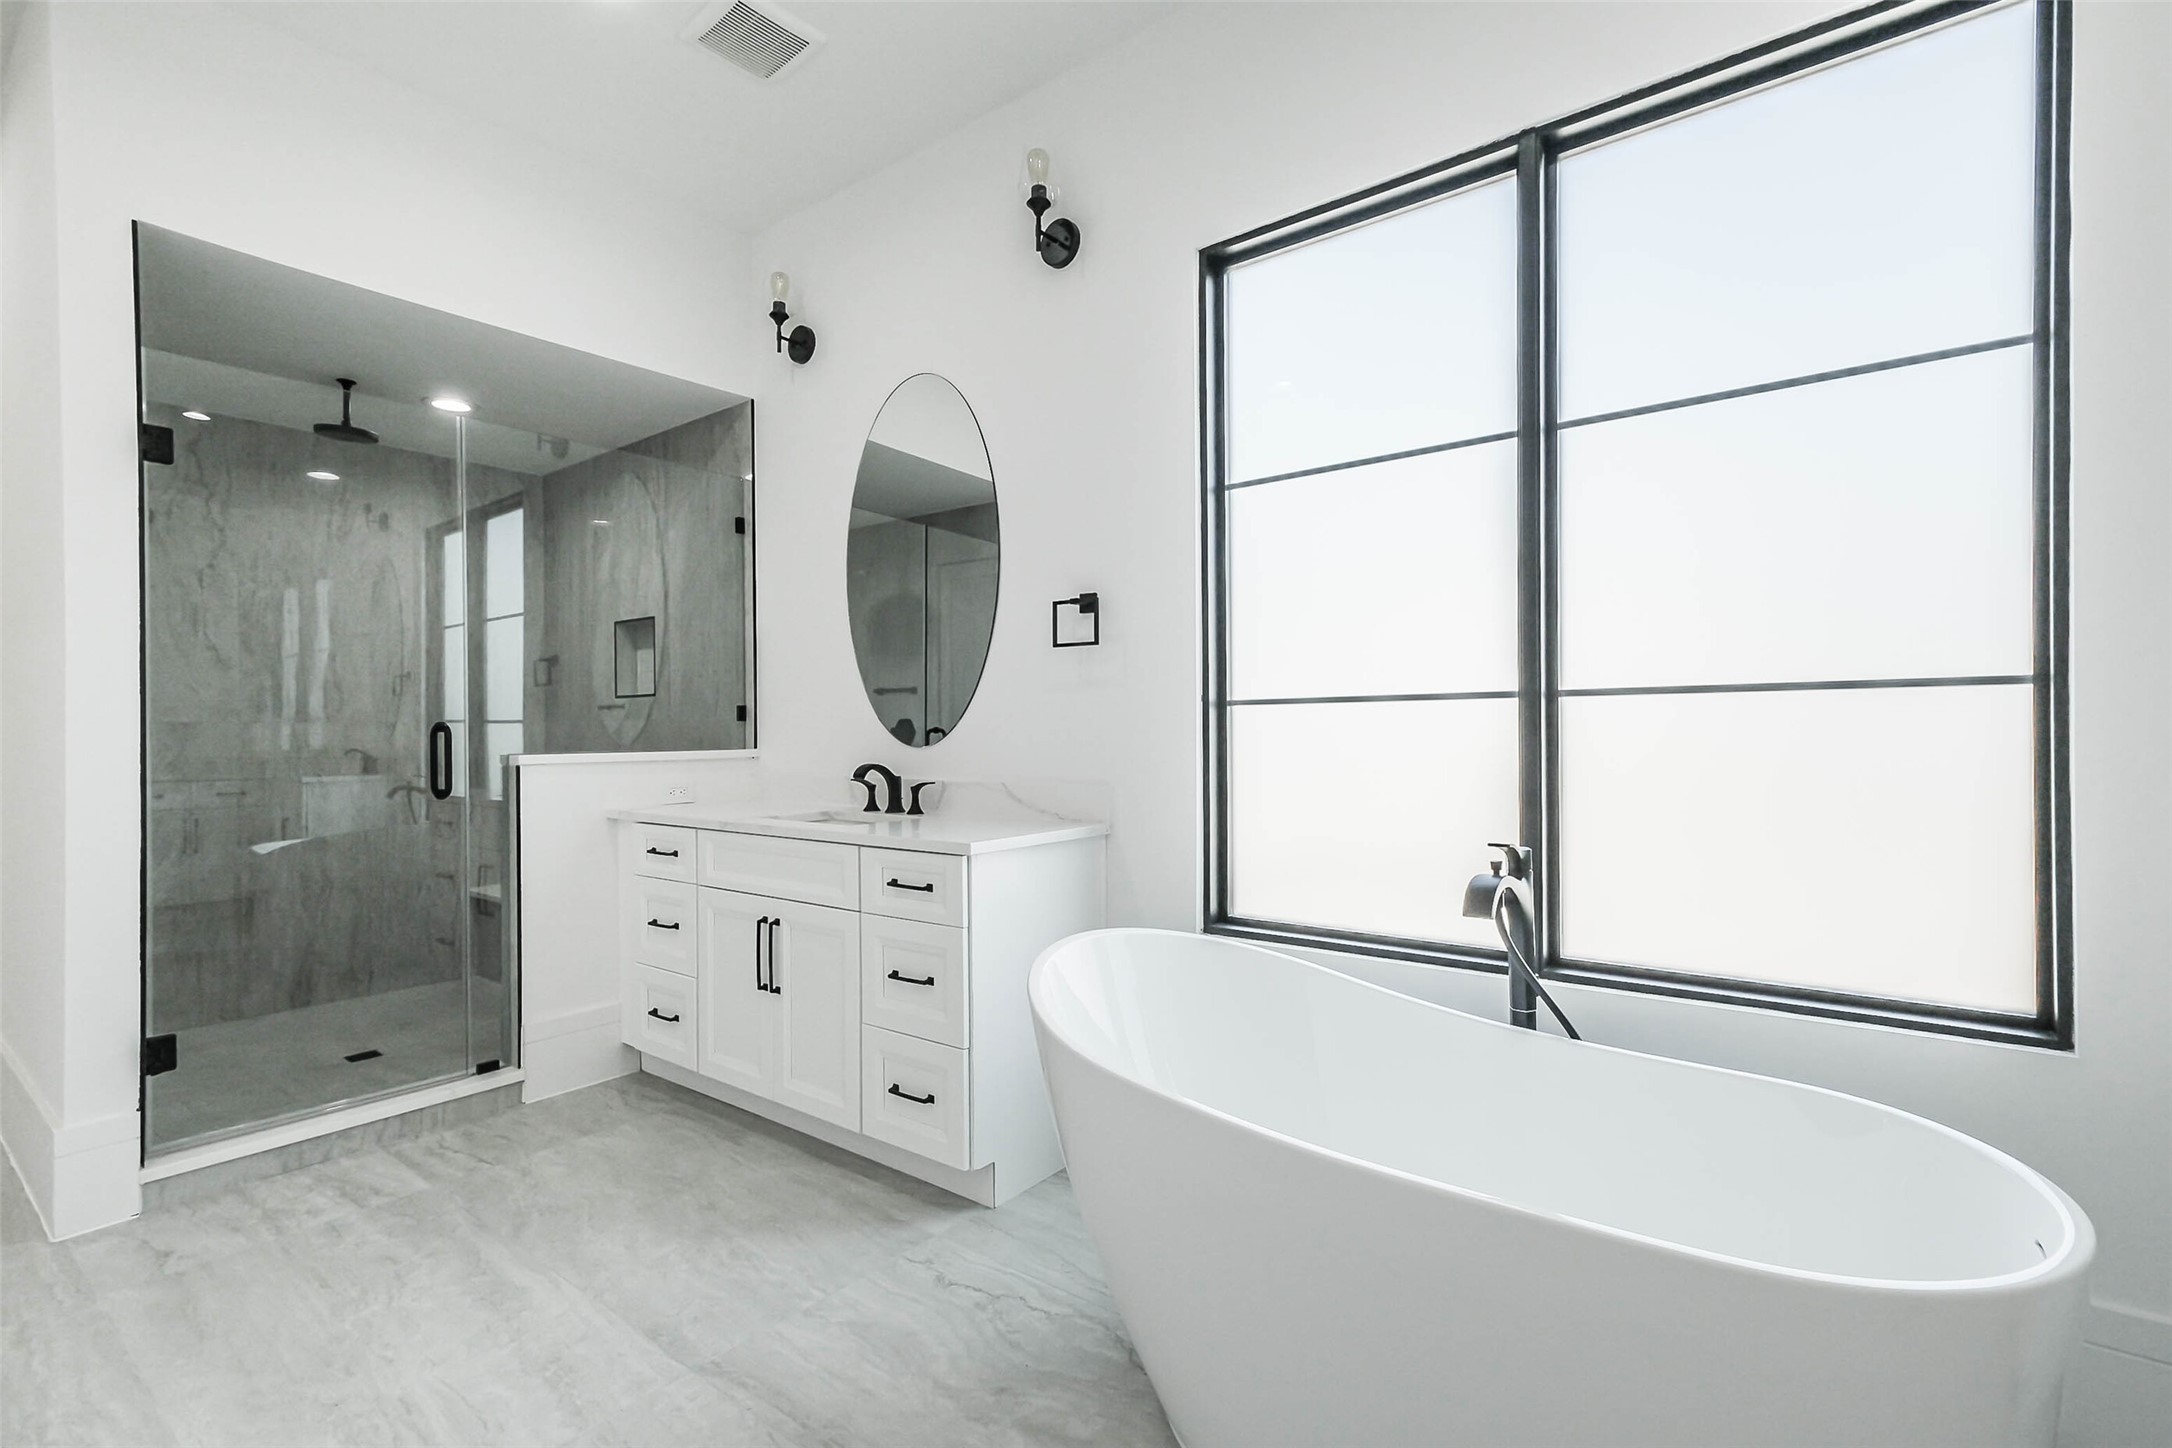 Primary Bath features Frameless Shower.